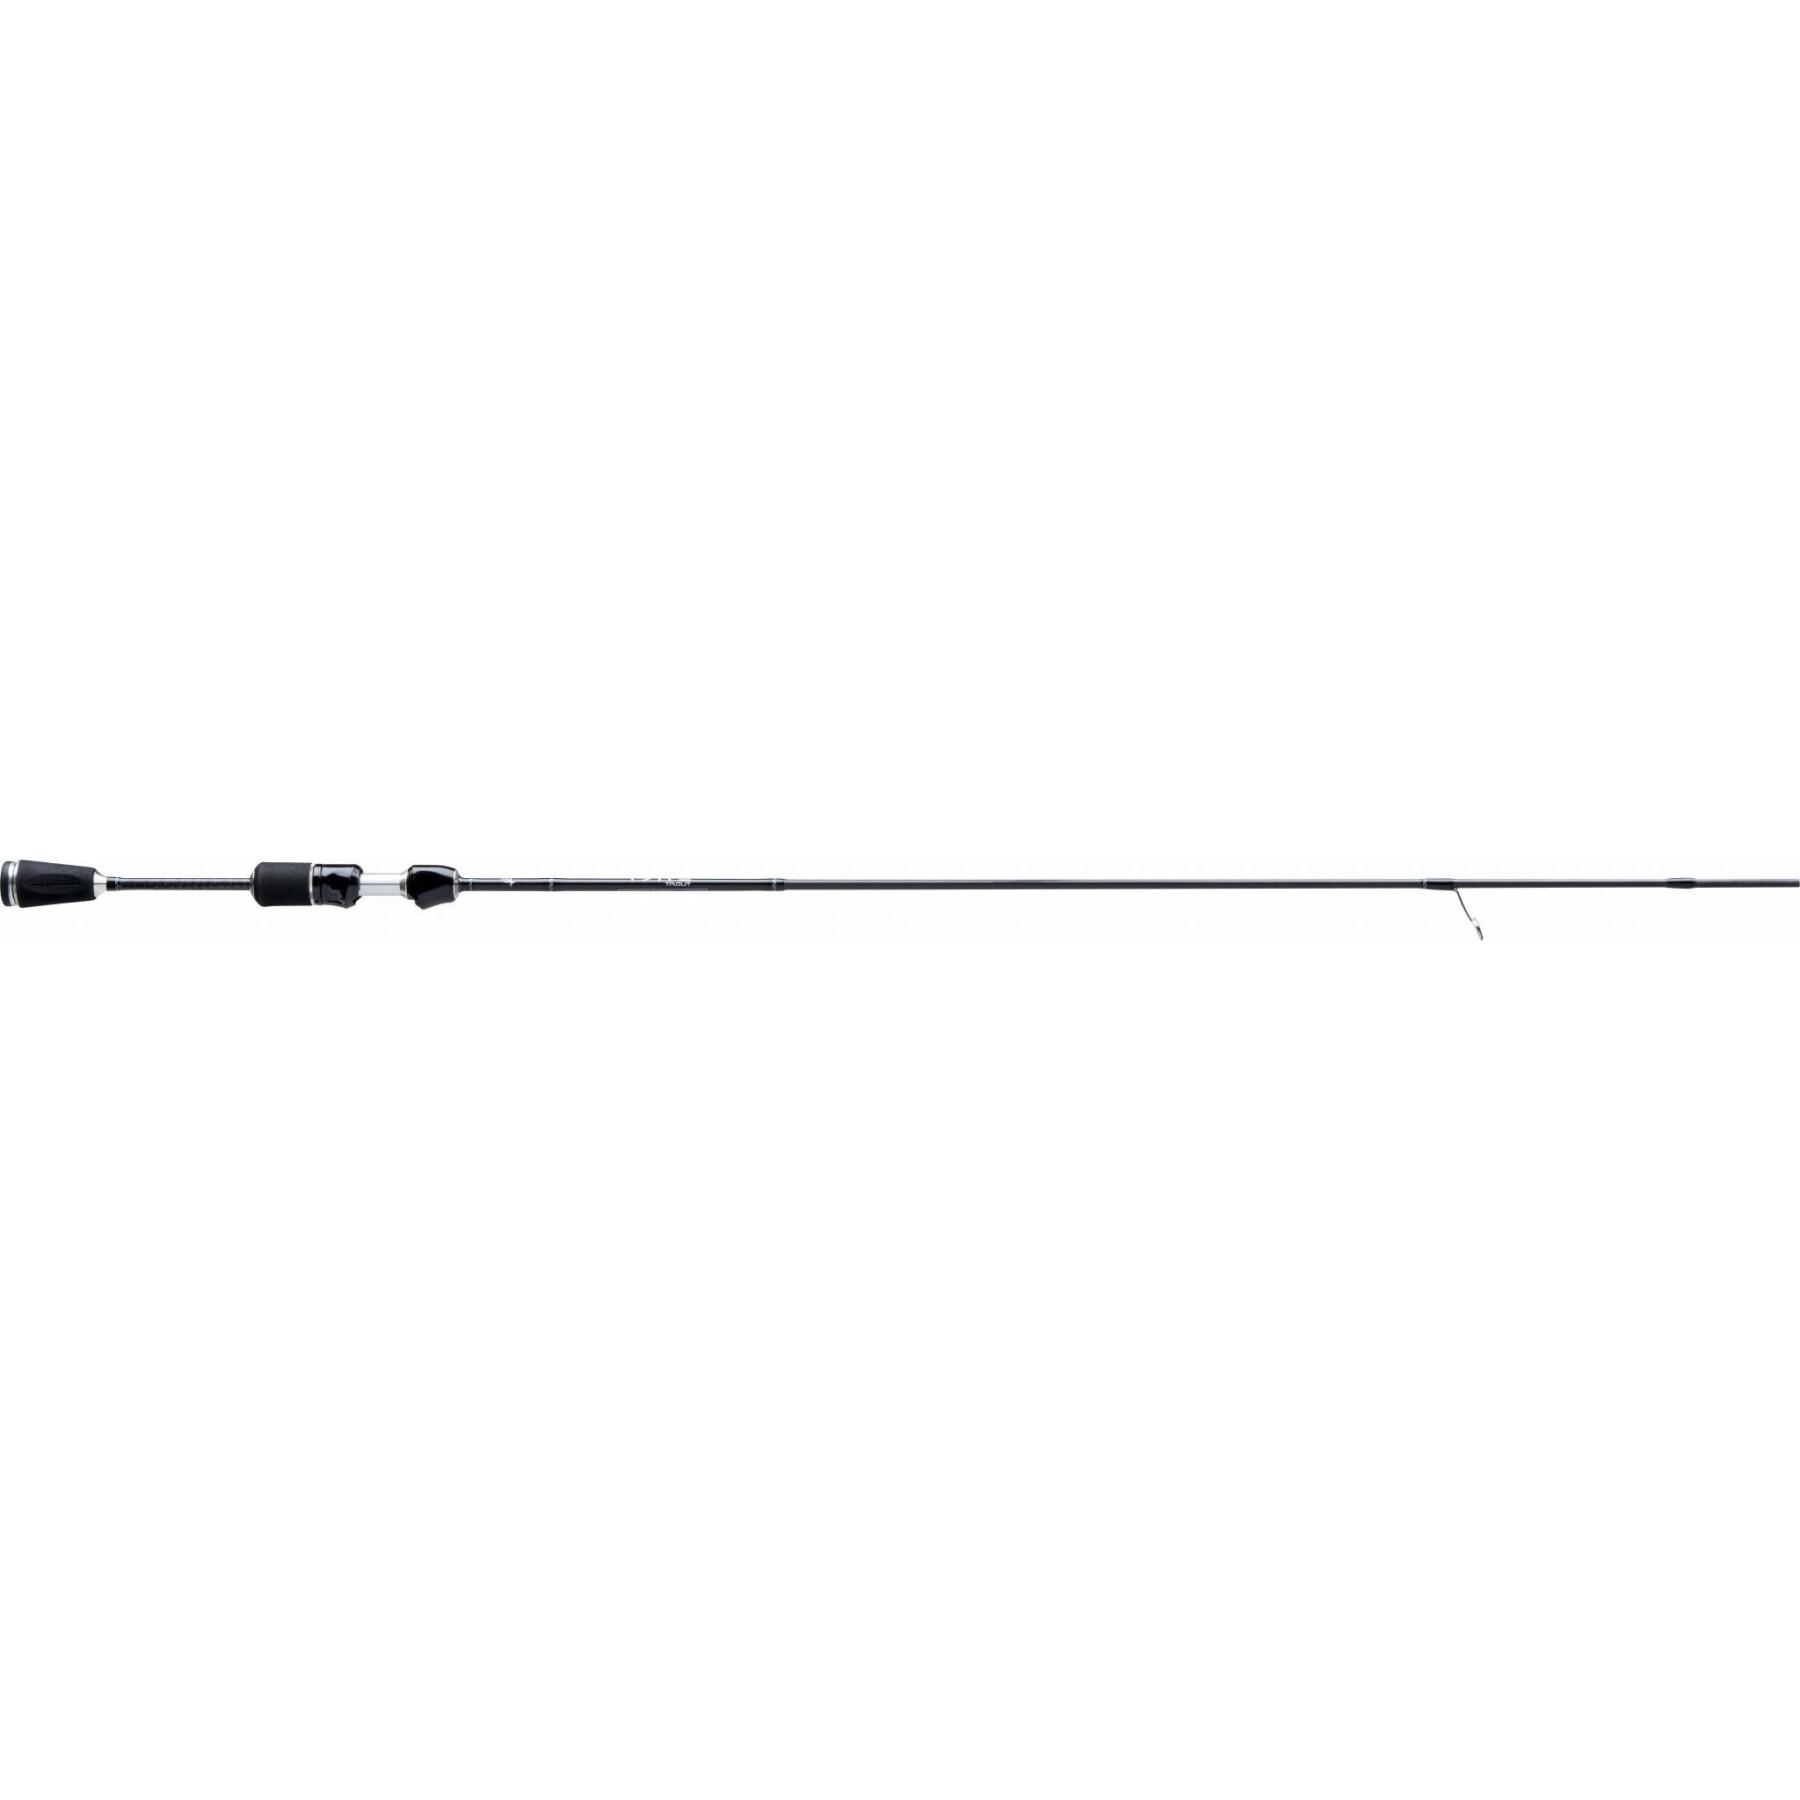 Canne 13 Fishing Fate Trout sp 2m 1-4g